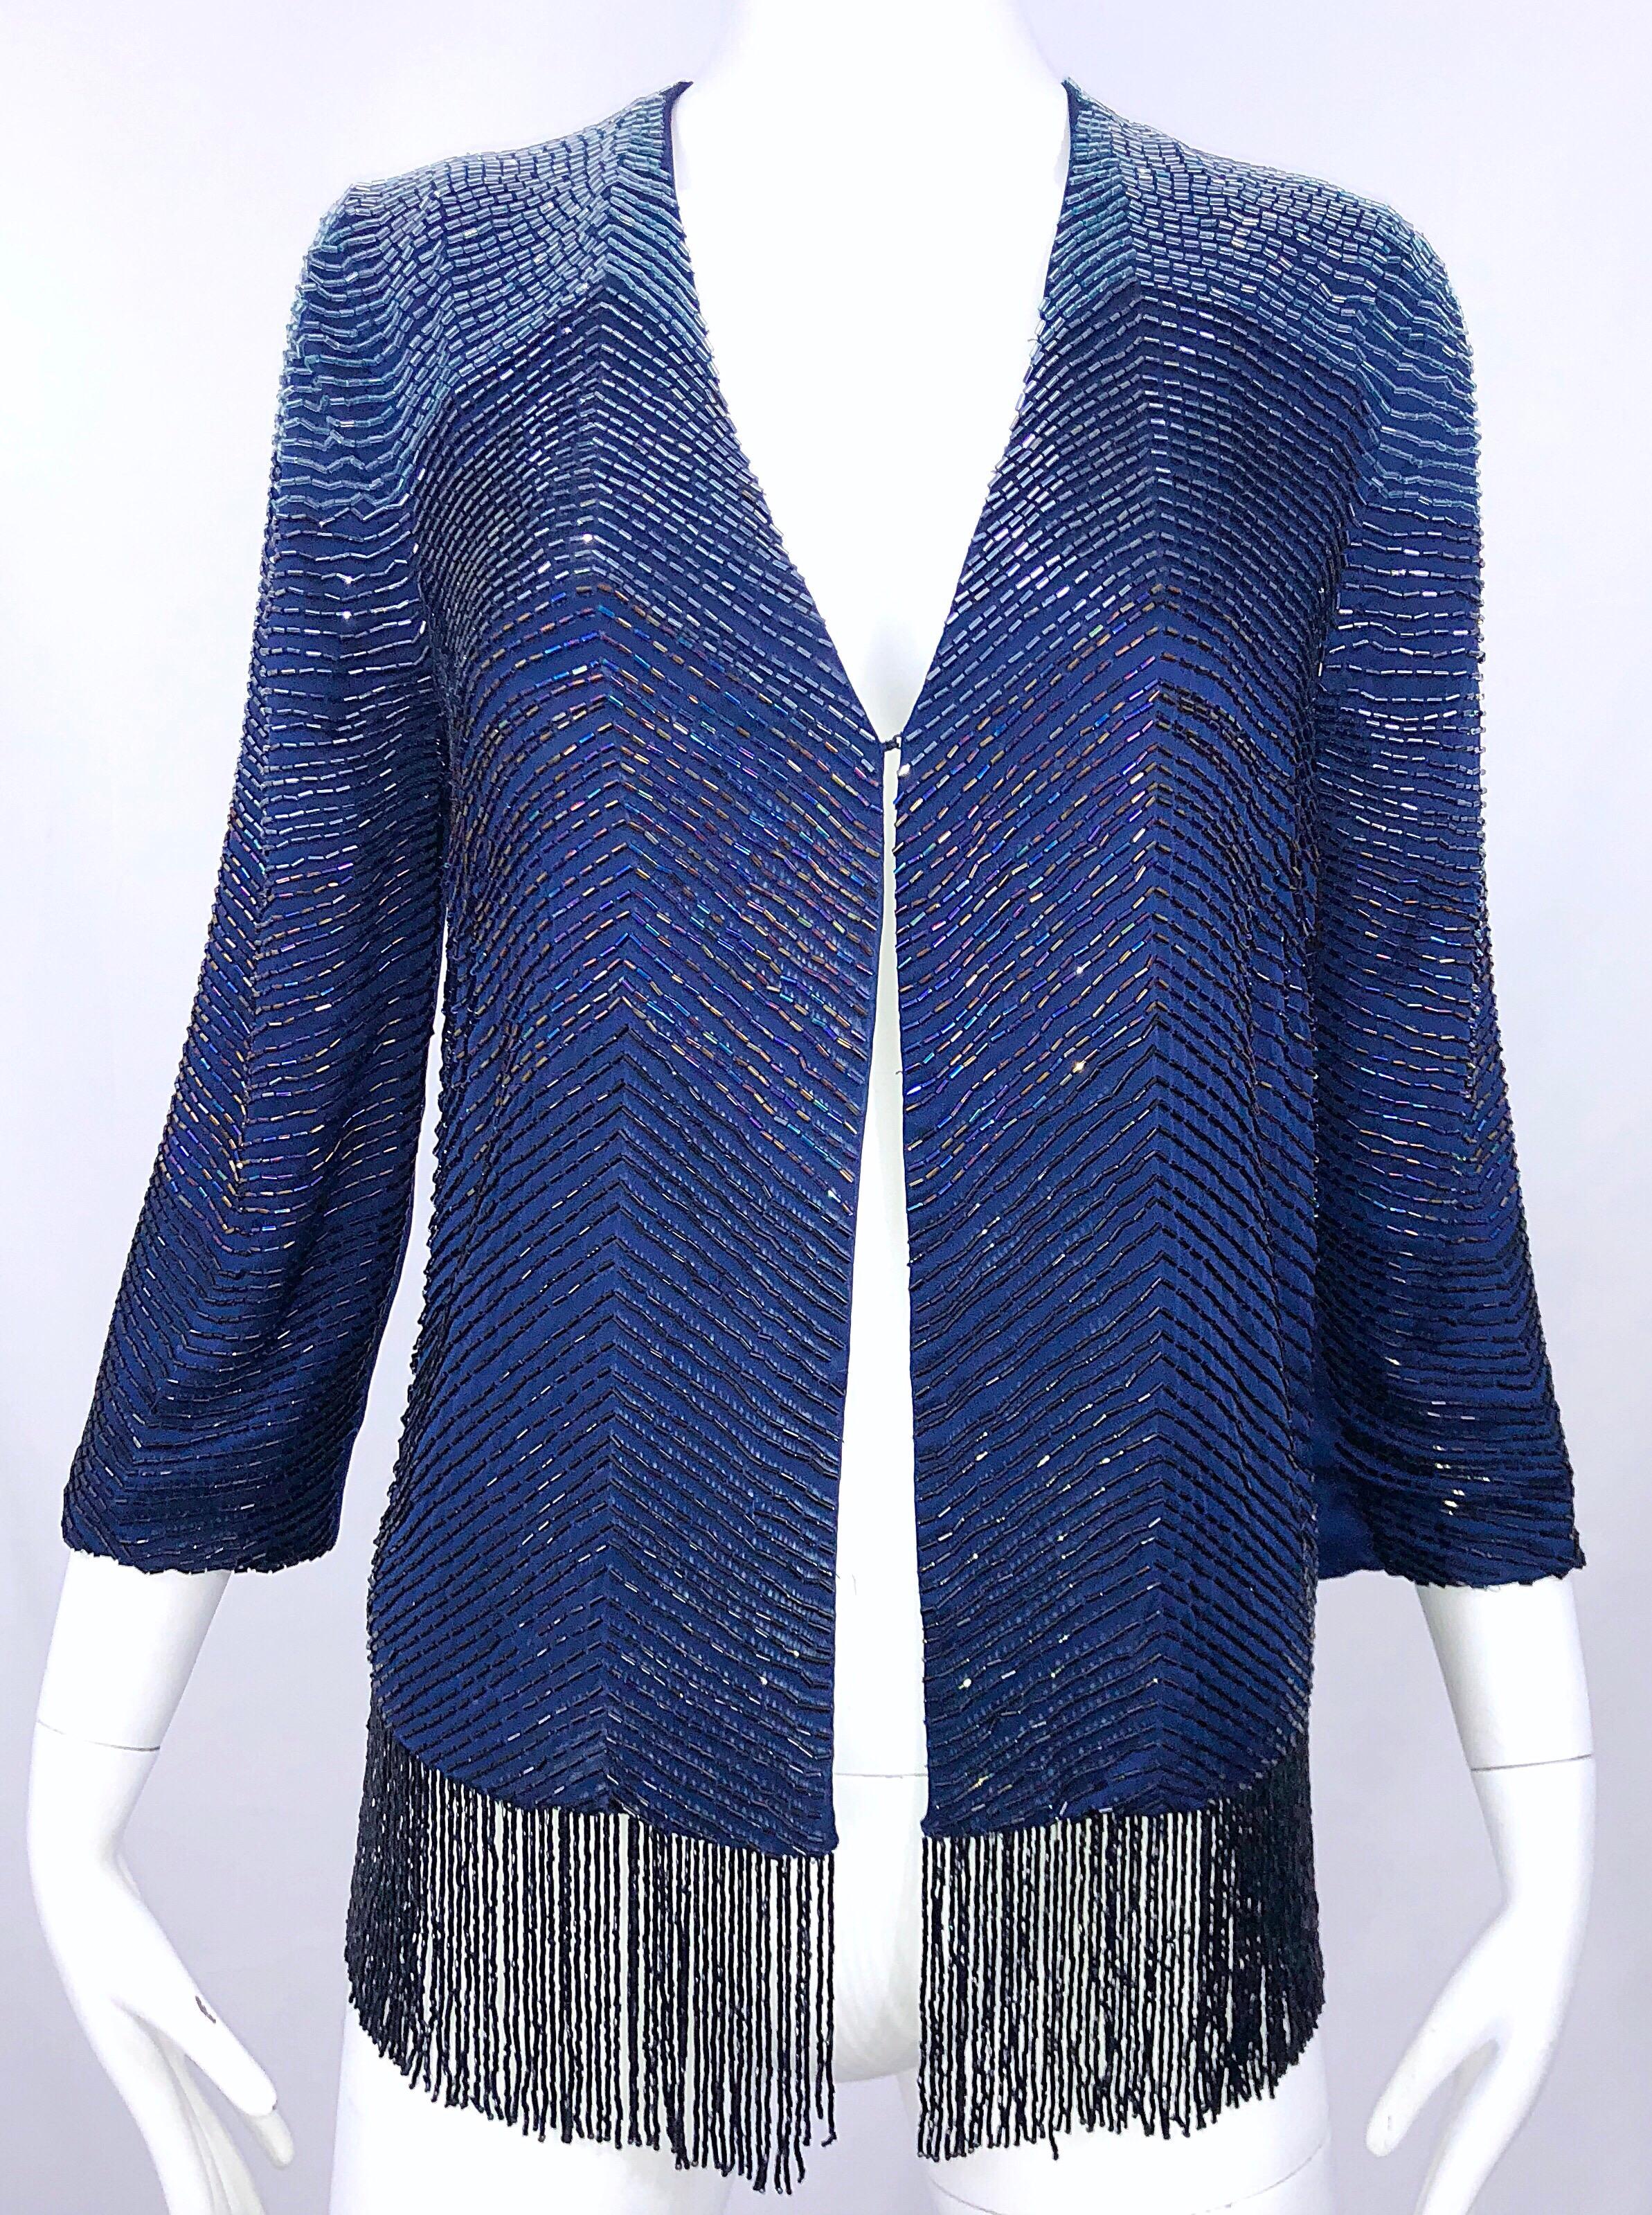 Incredible vintage beaded silk 3/4 sleeve navy blue beaded cardigan! Luxurious navy blue silk with hundreds of hand-sewn beads throughout the front and back. Beaded tassel fringe along the hem. Single hook-and-eye closure. Can easily be dressed up